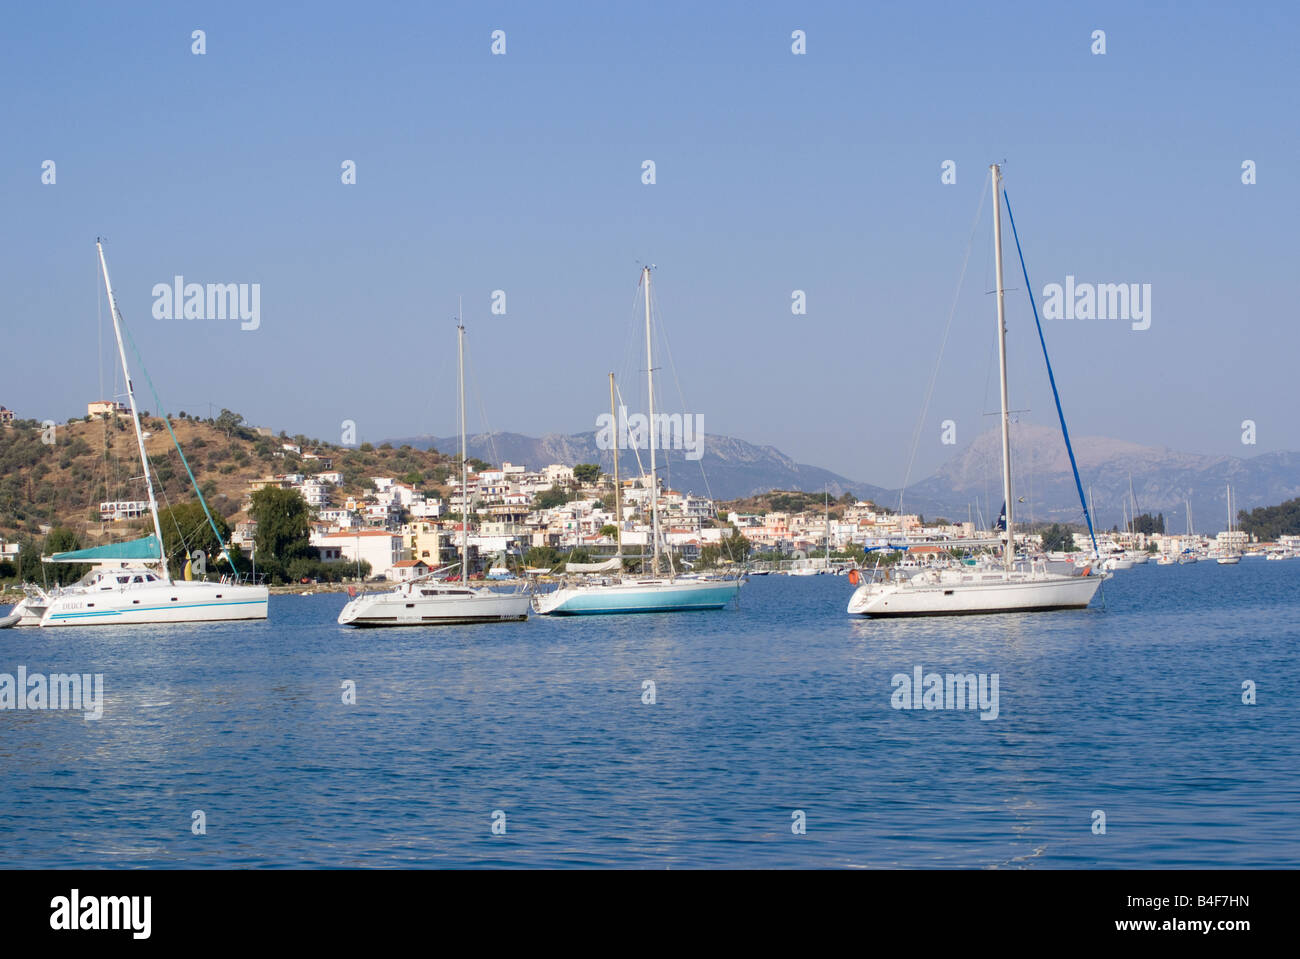 Yachts Moored in the Aegean Sea with Galatas Town in Mainland Greece in Background Stock Photo